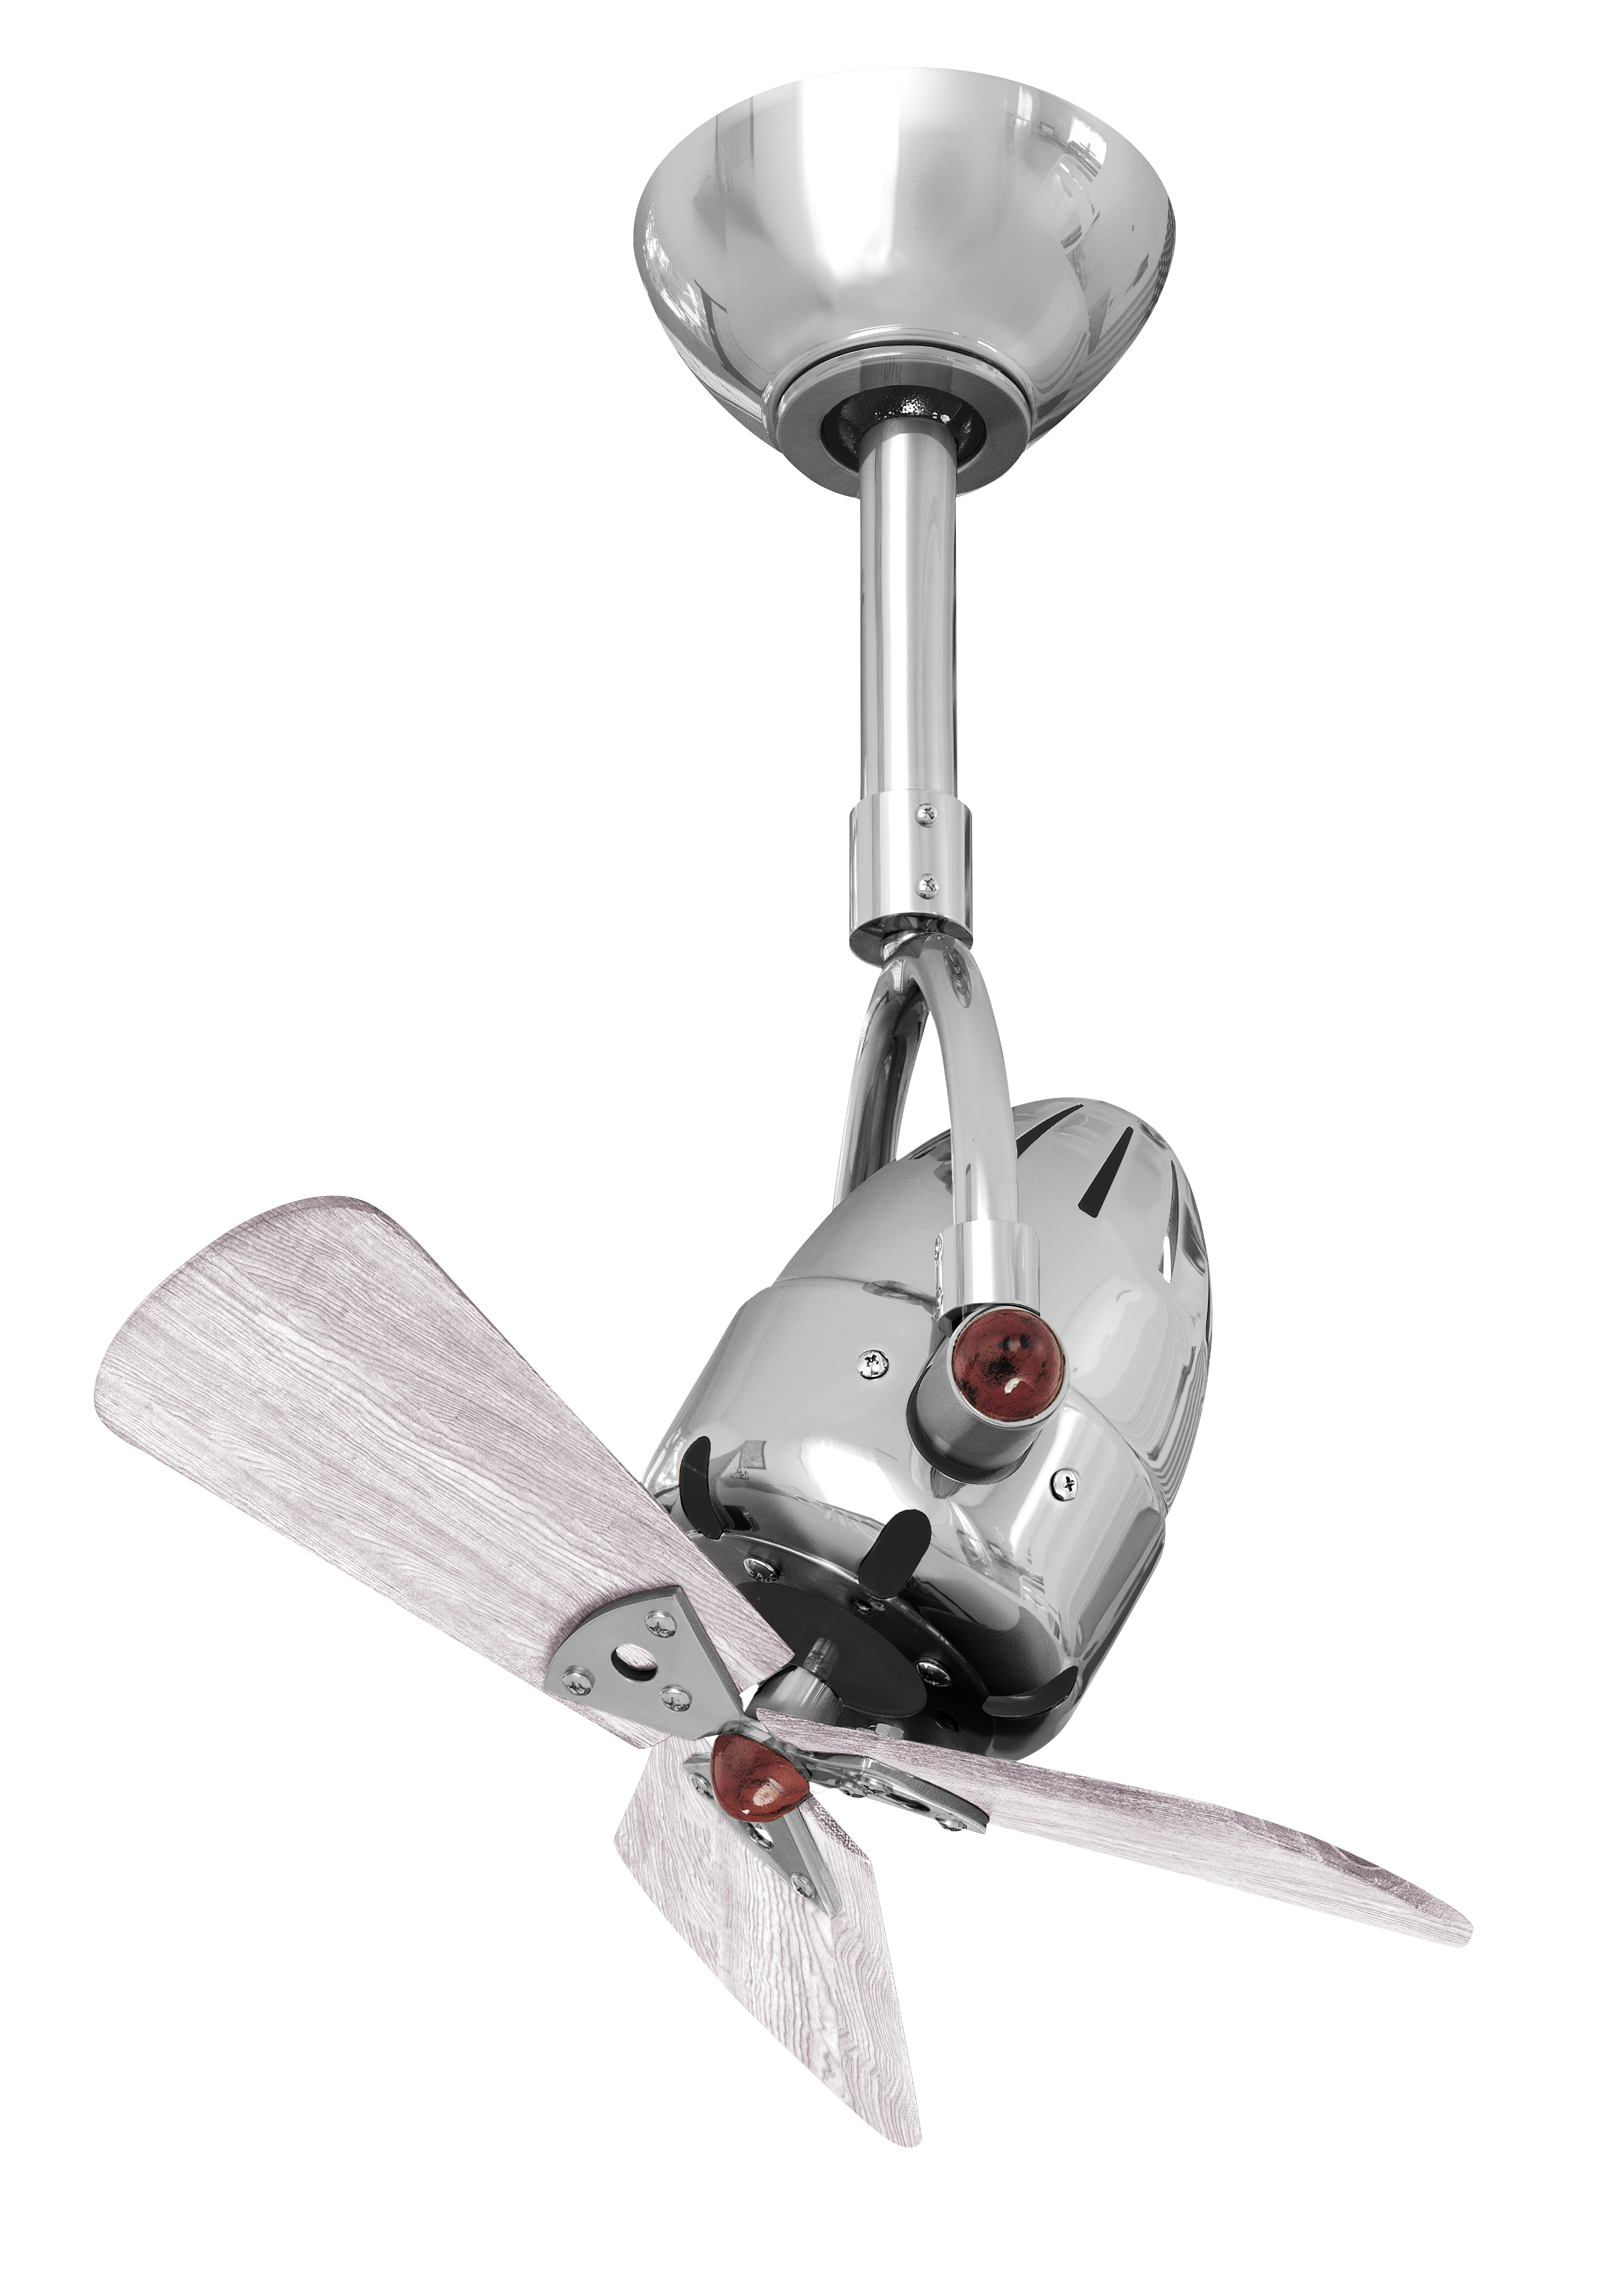 Diane ceiling fan in Polished Chrome with Barn Wood blades